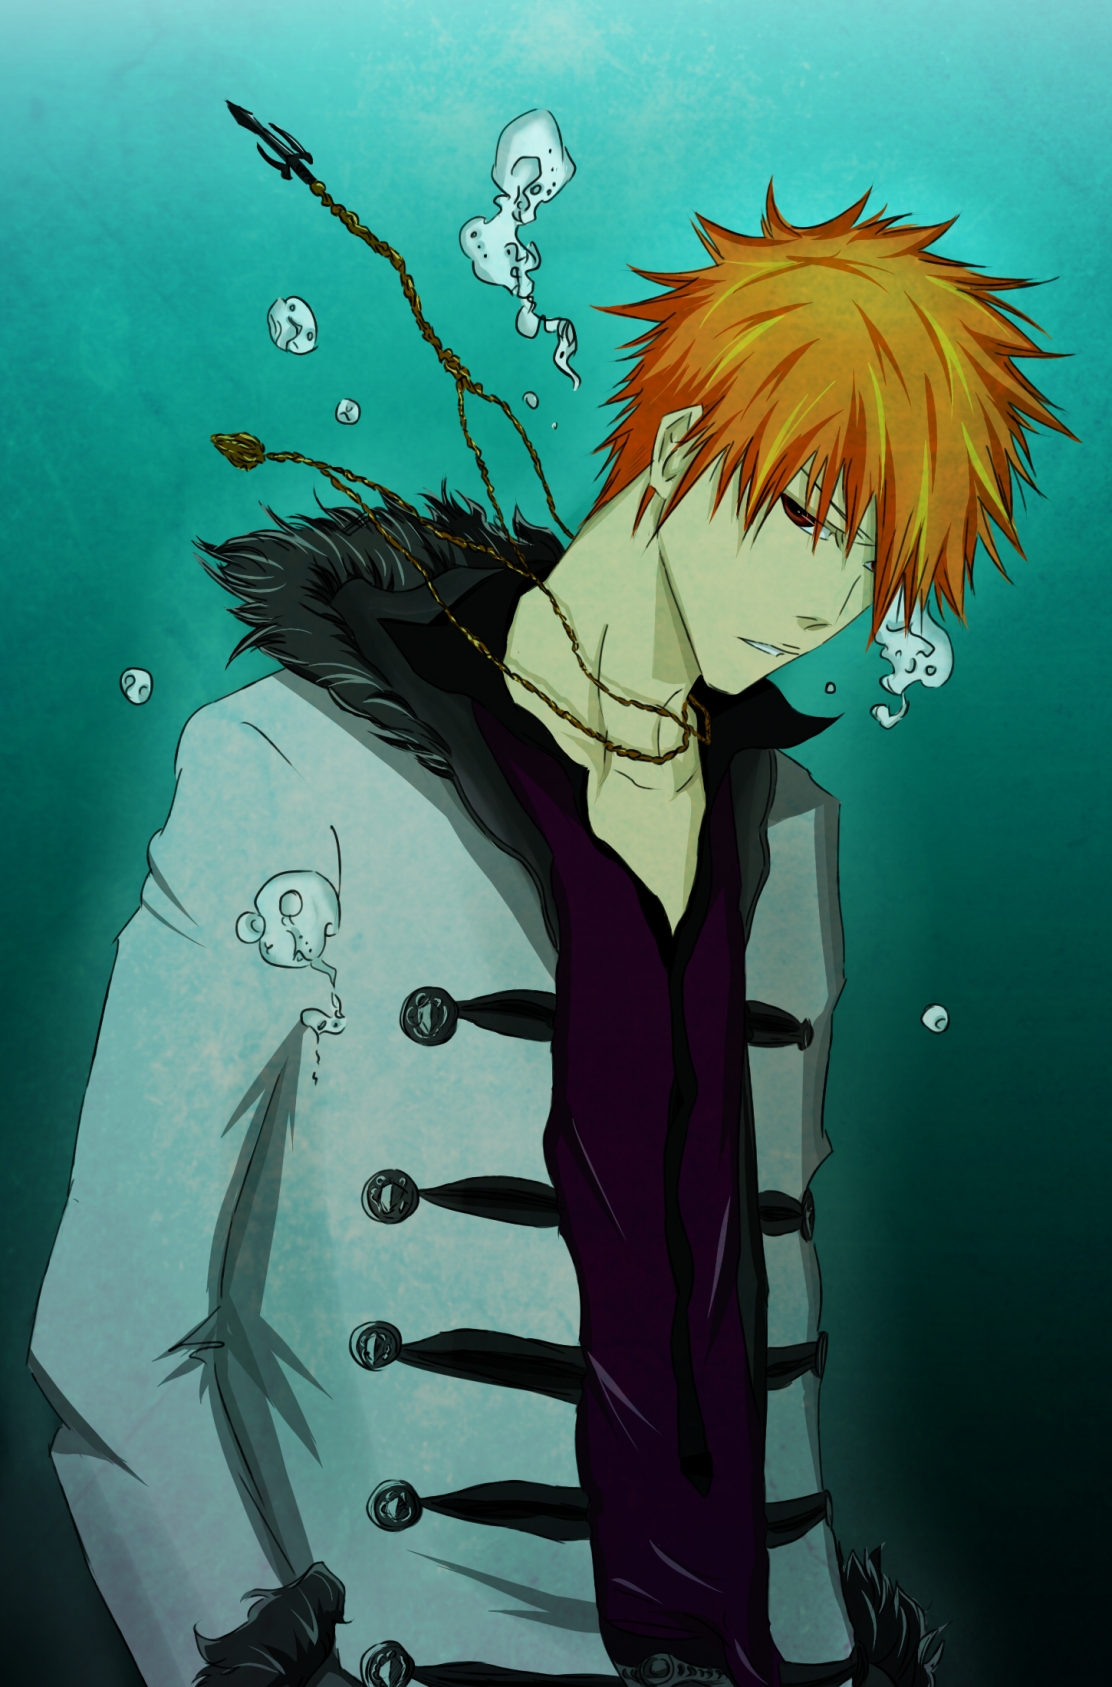 Exclusive Bleach Wallpapers! Never Seen Before! | Daily Anime Art